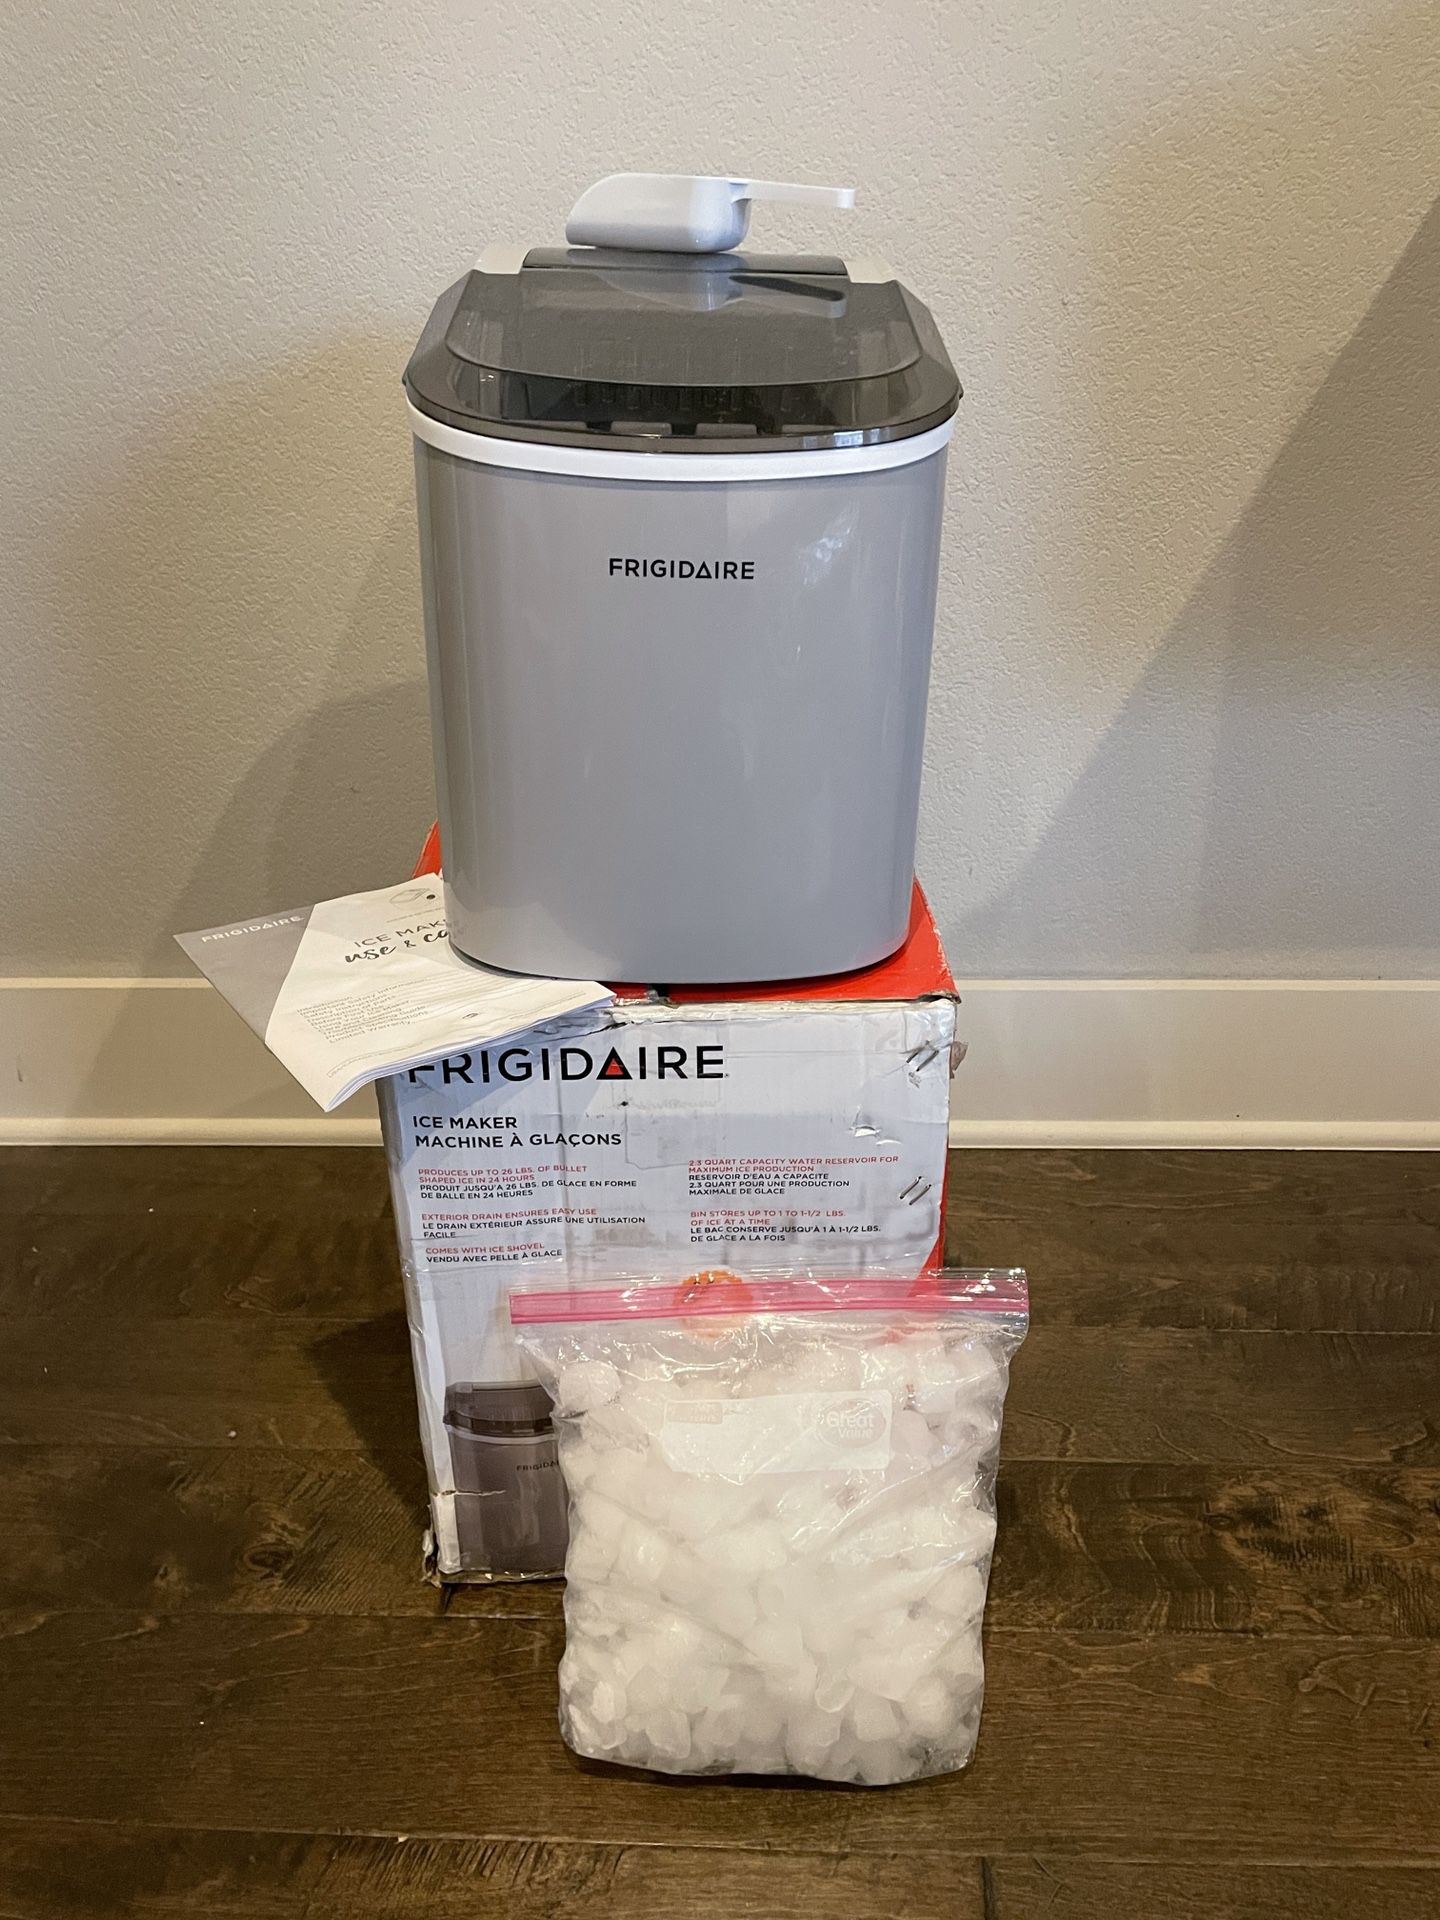 Frigidaire Countertop Ice Maker Portable. Used once. $129 Retail.